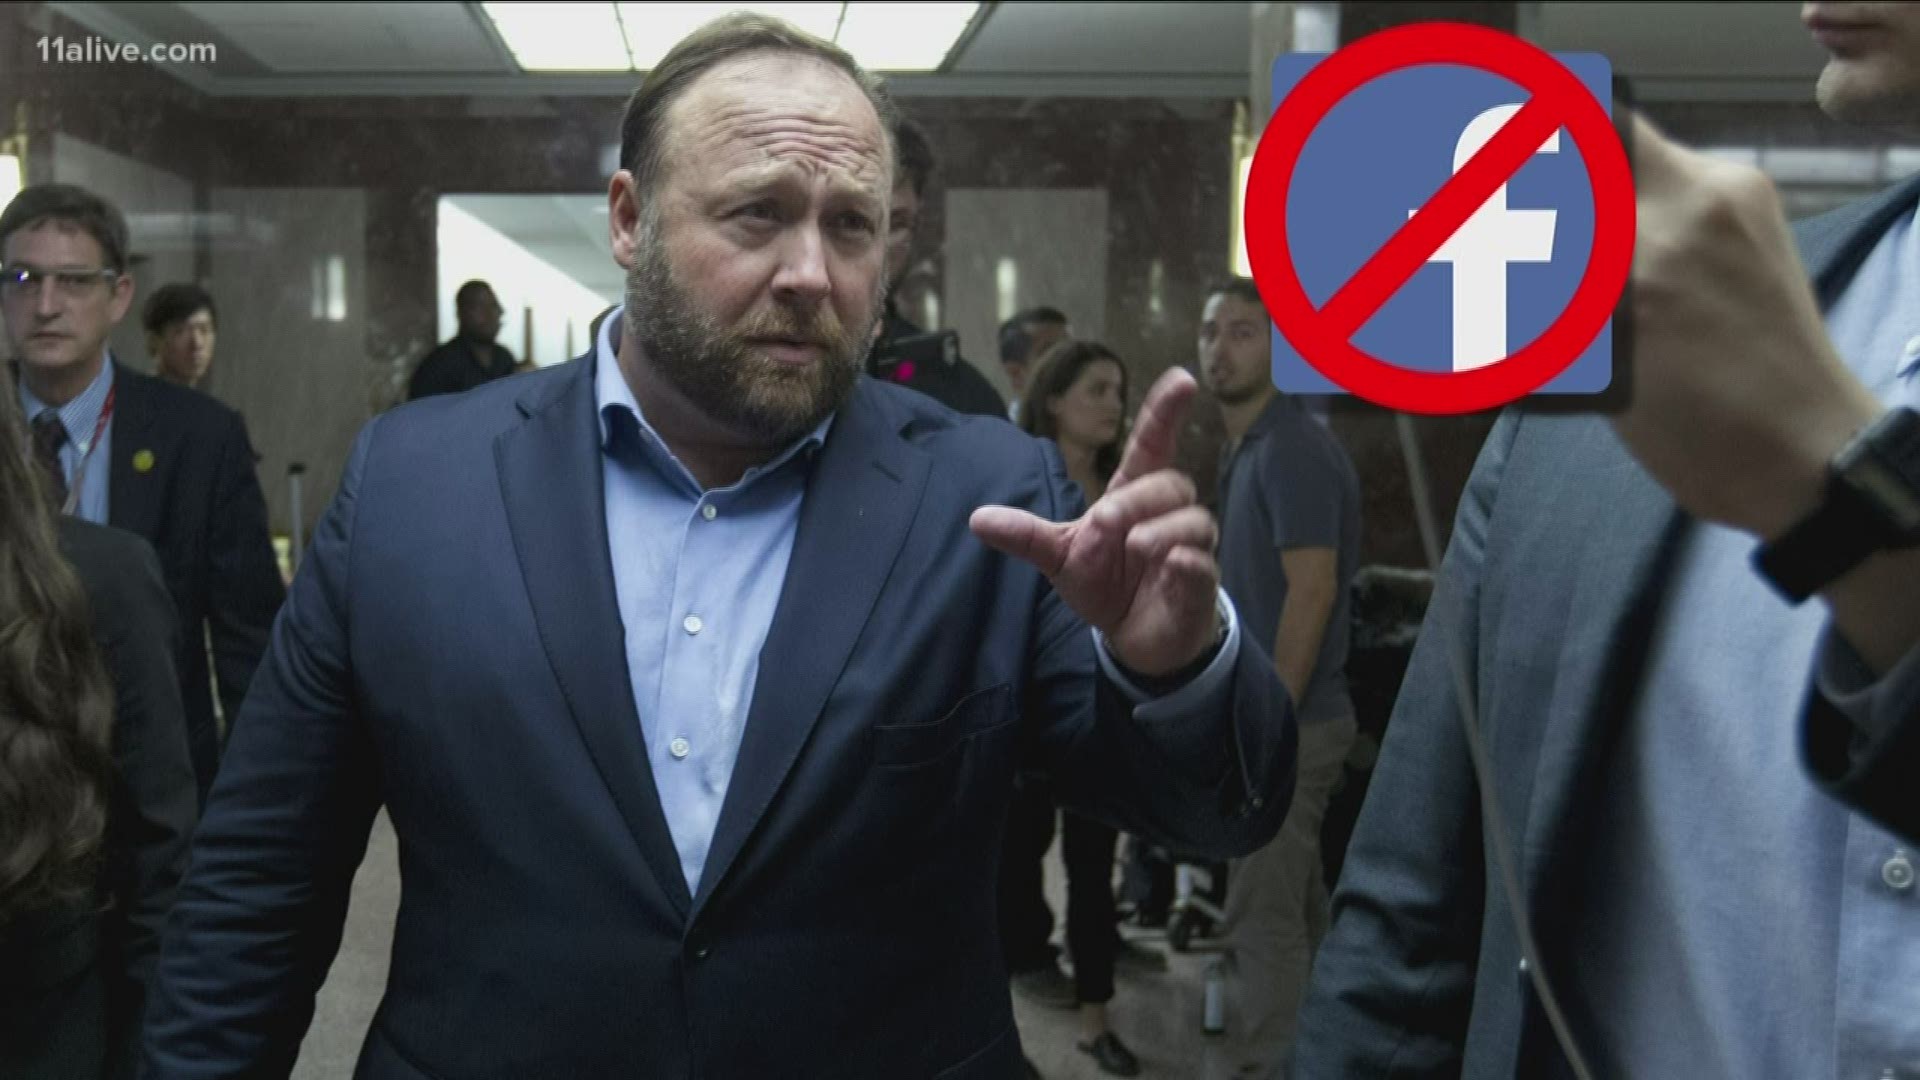 InfoWars’ Alex Jones had already been banned from Facebook, but just got banned from Instagram Thursday.